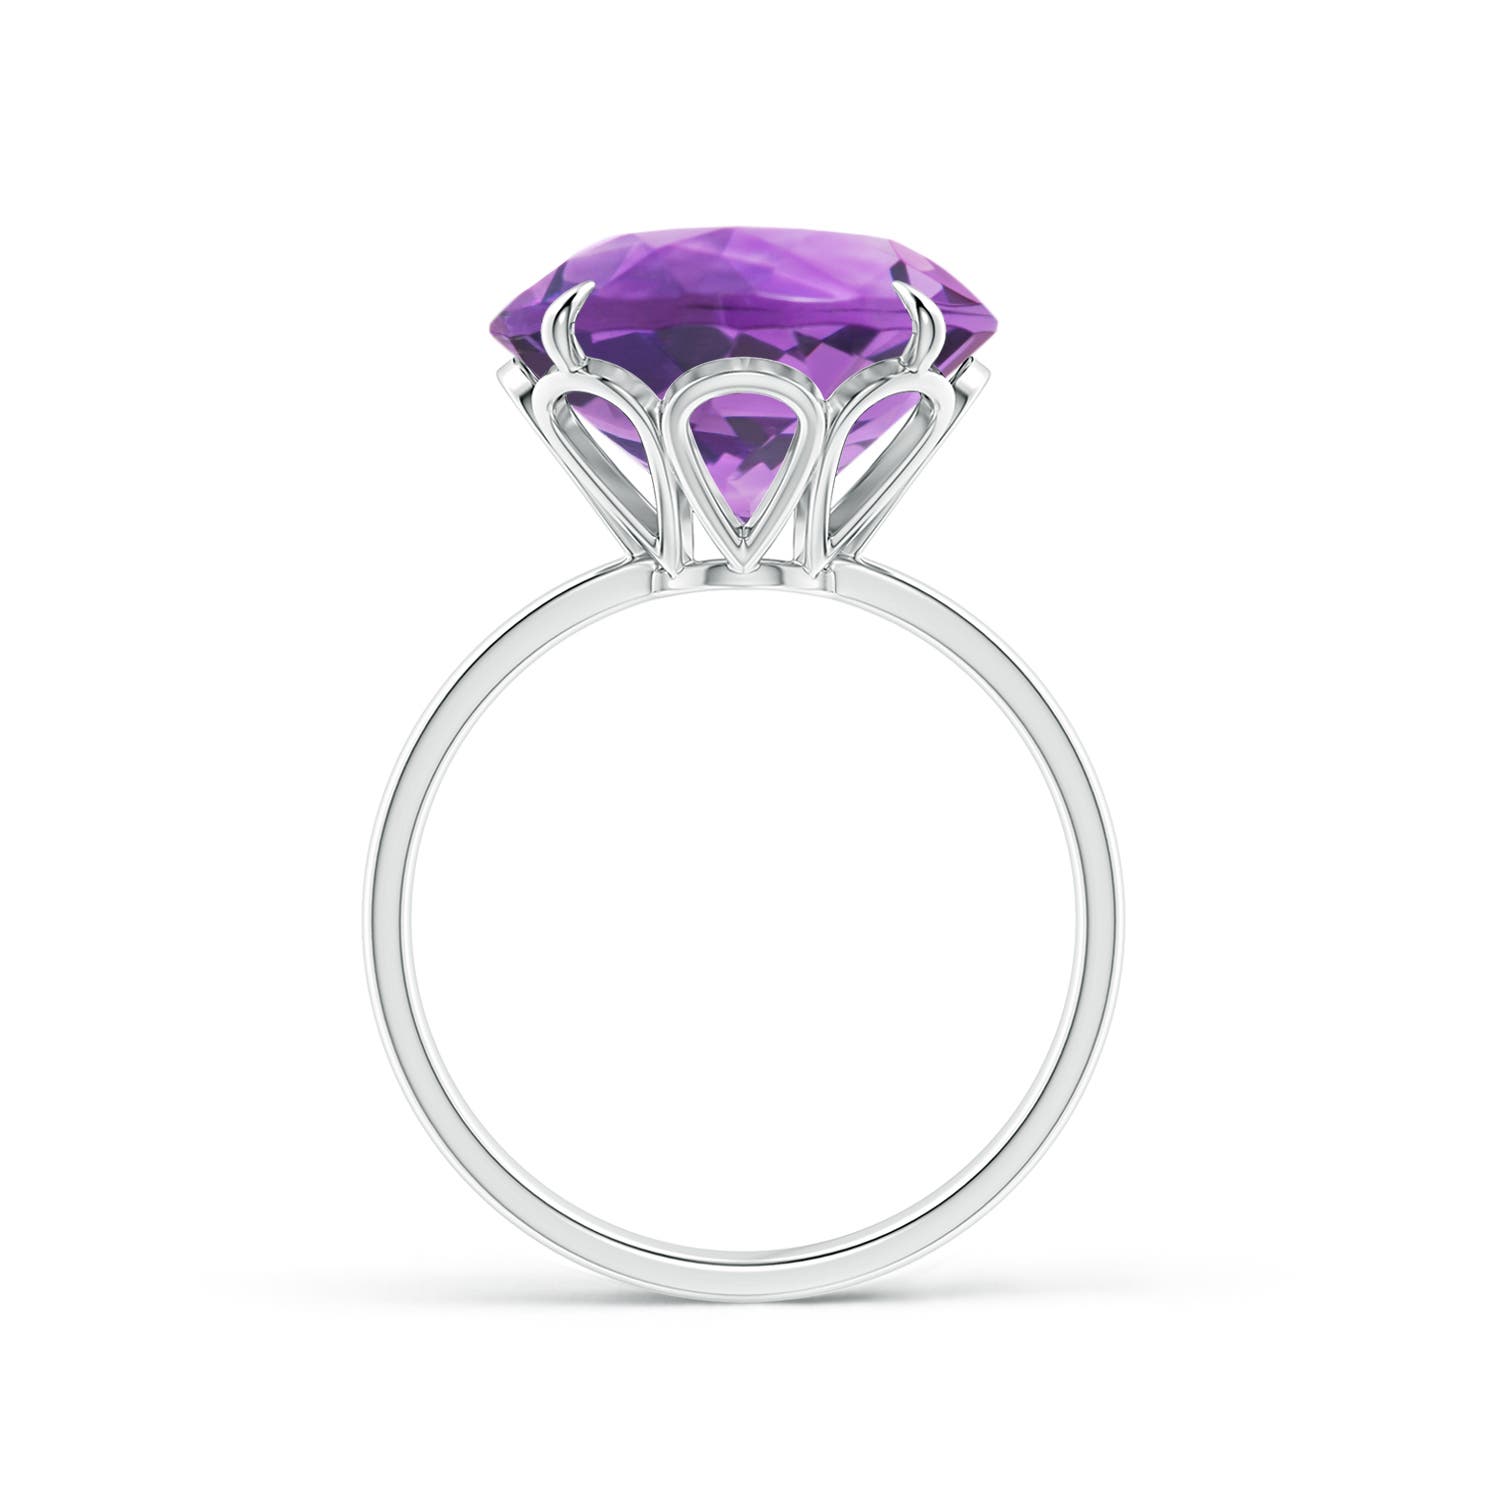 AA- Amethyst / 7.2 CT / 14 KT White Gold